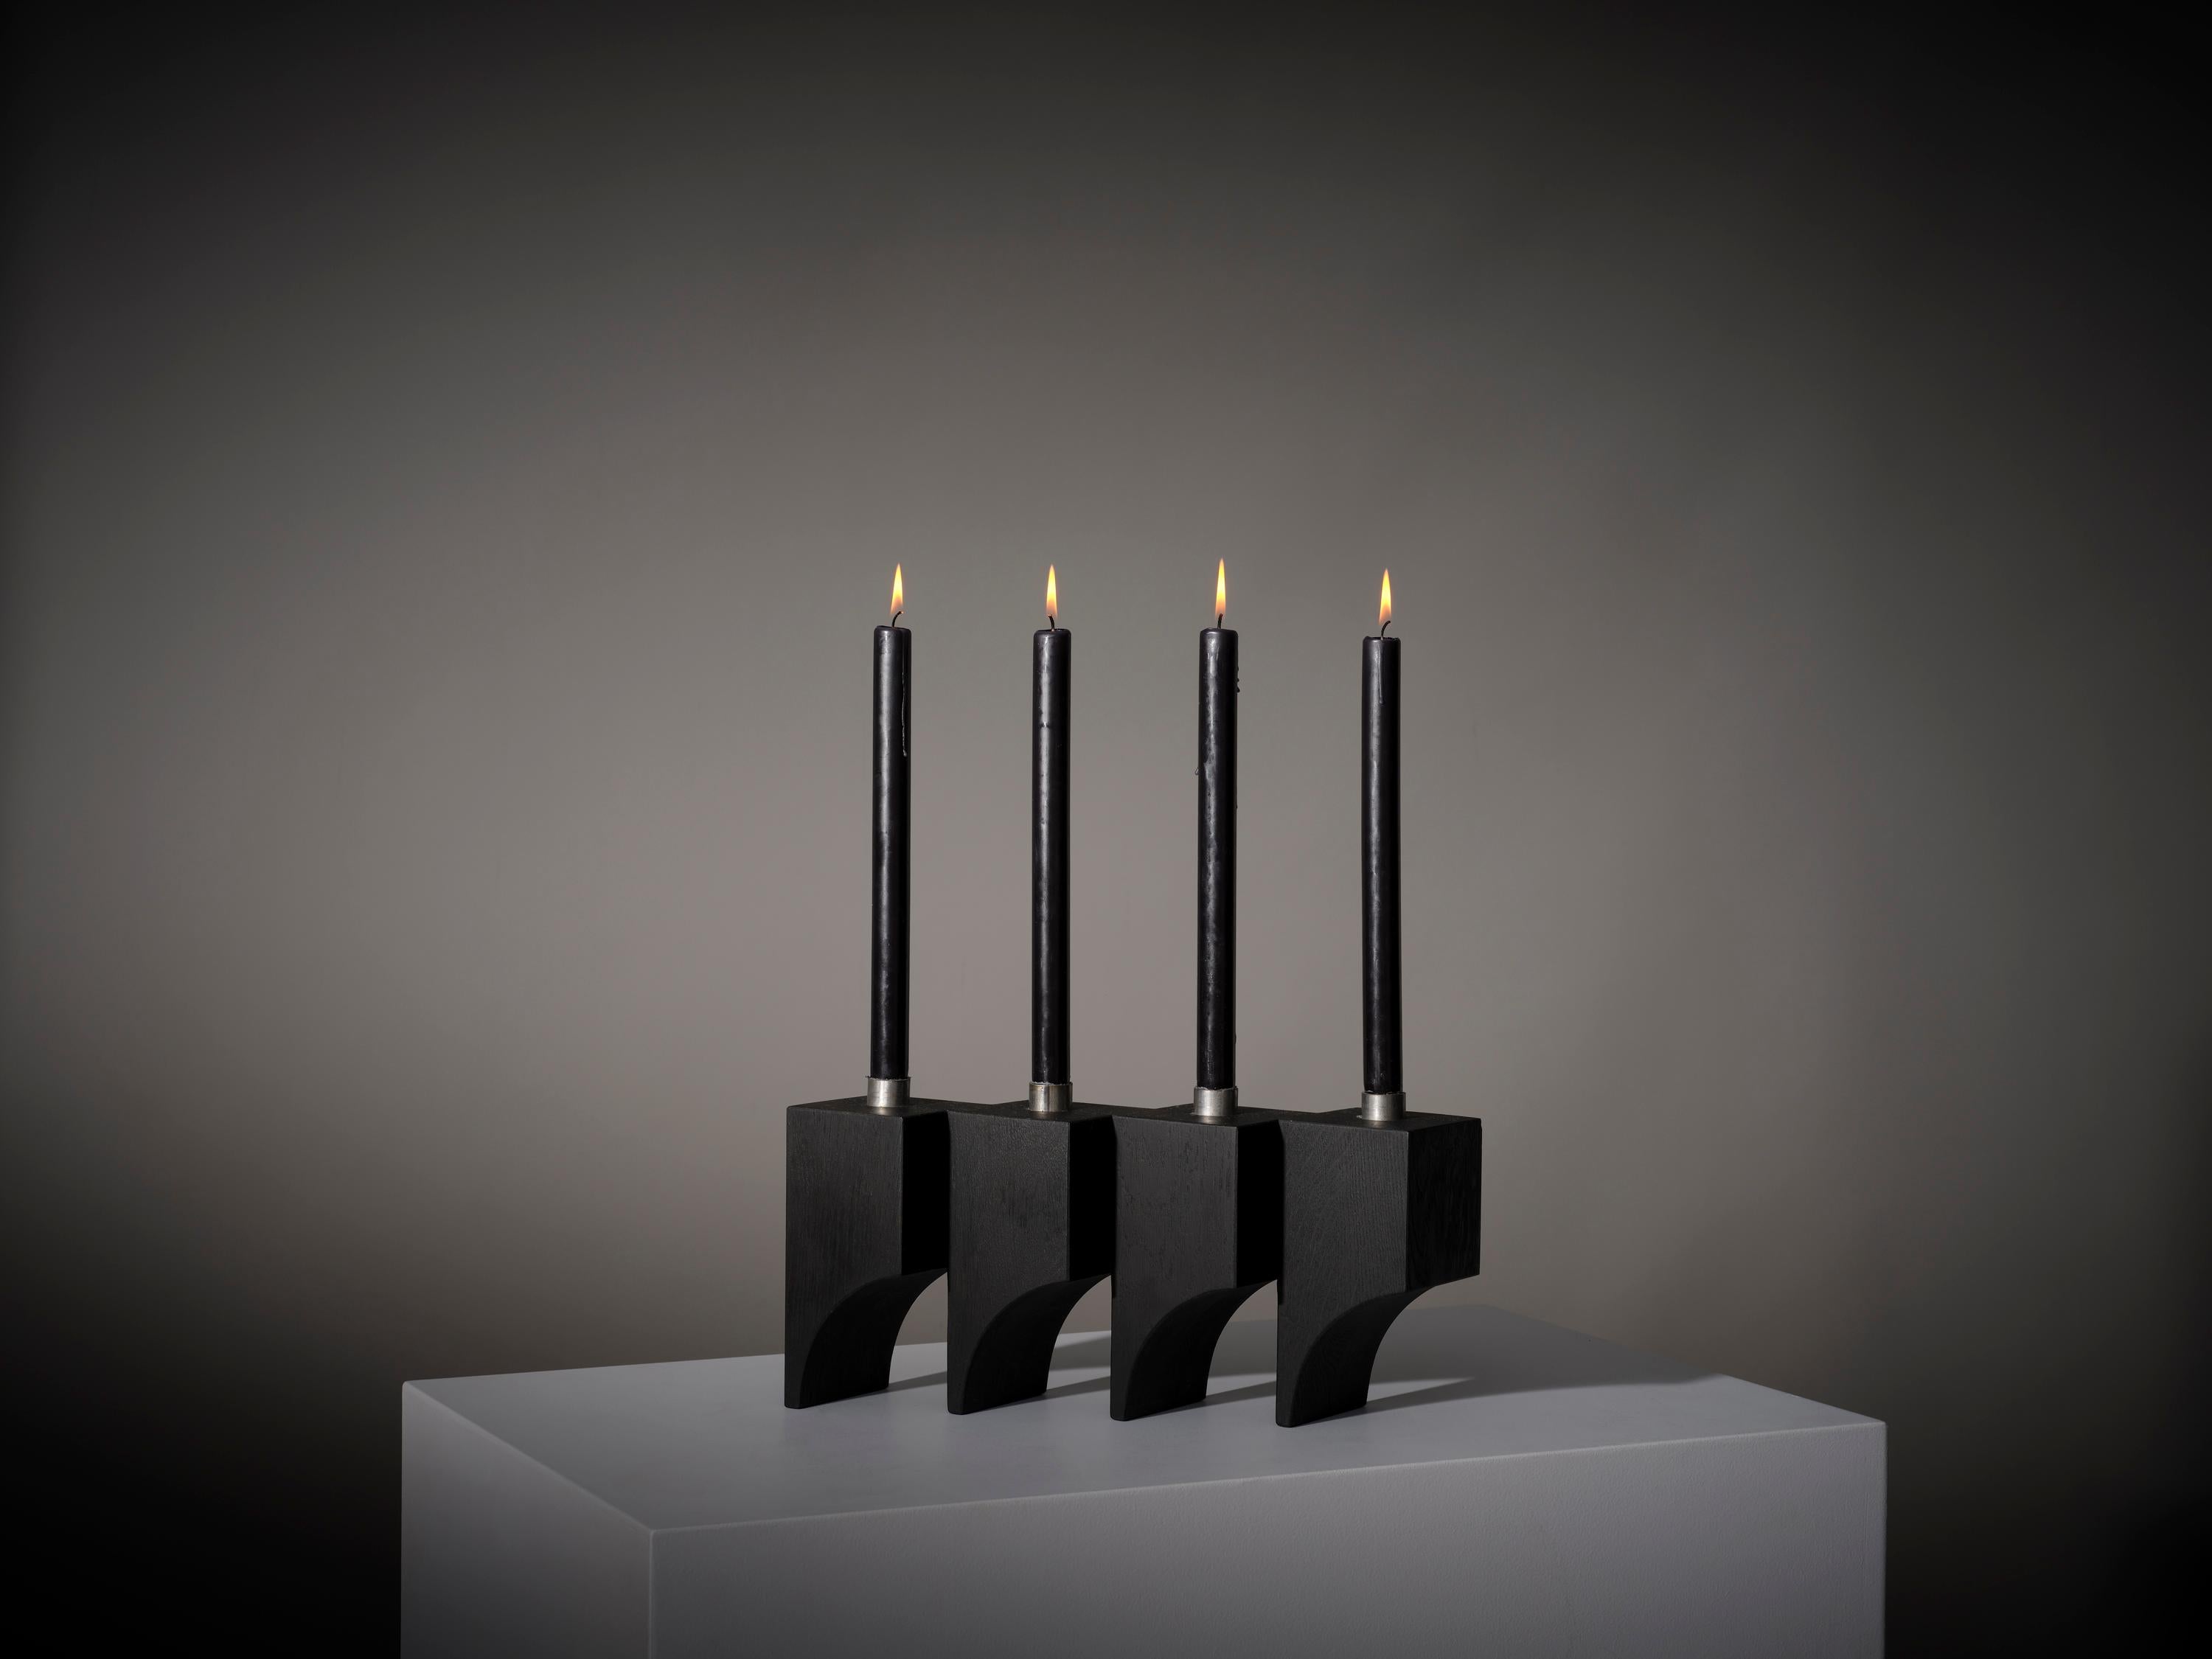 The Acer candle holder R:4 features a rhythmic architectural interplay of cubic volumes and semi arched voids. Designed by Aad Bos and hand crafted by our carpenters from solid oak wood and steel.

Mokko is an Amsterdam based design studio with a